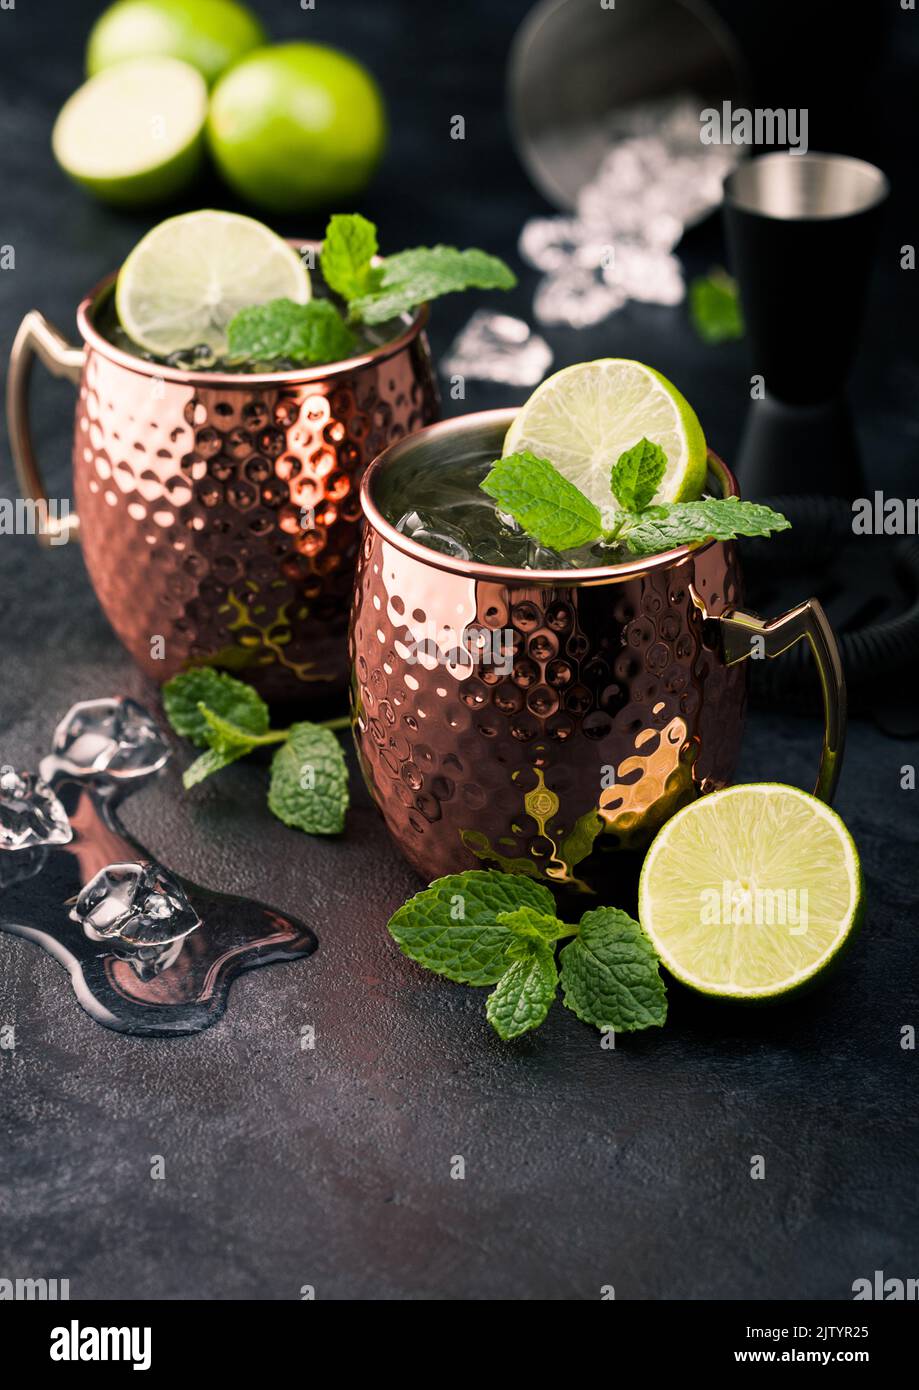 Moscow mule cocktail in a copper mug with lime and mint and wooden squeezer on dark kitchen background with ice cubes. Stock Photo